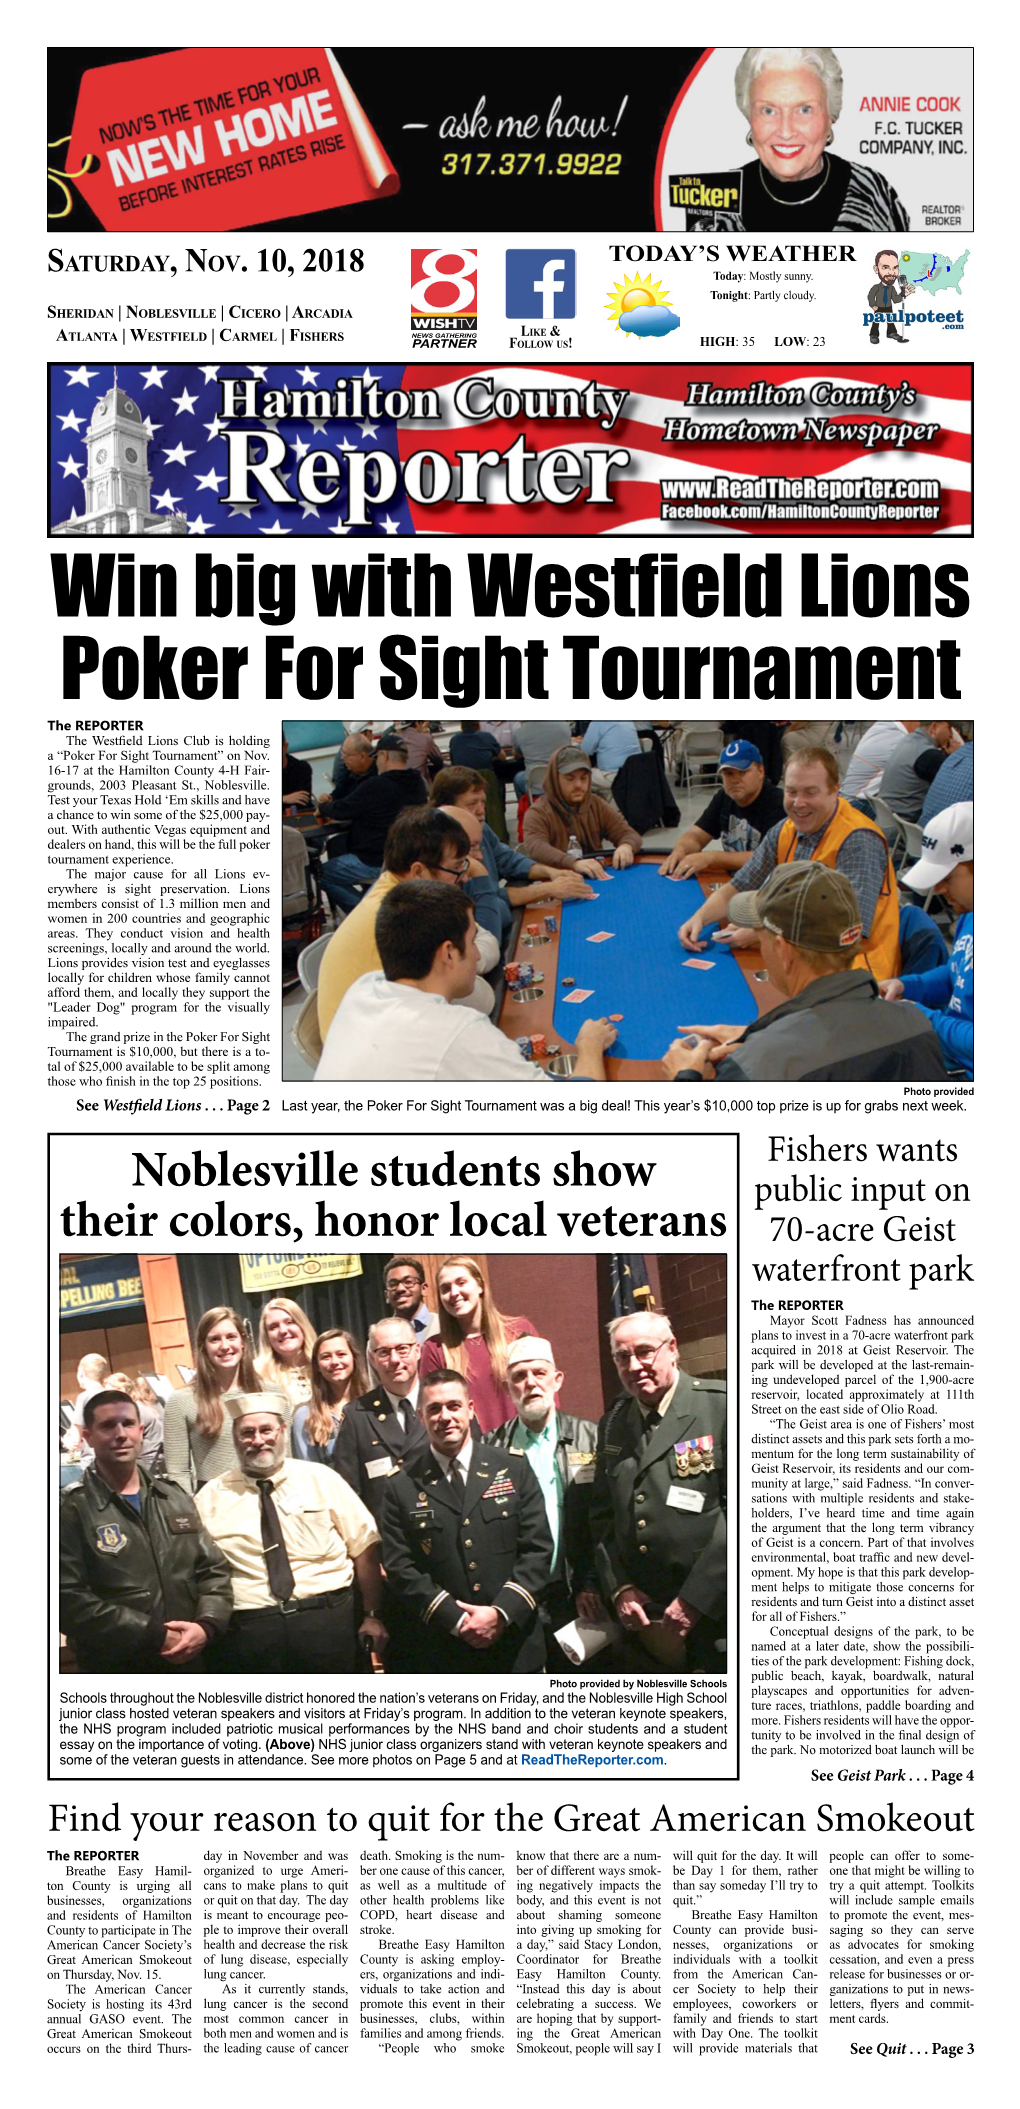 Win Big with Westfield Lions Poker for Sight Tournament the REPORTER the Westfield Lions Club Is Holding a “Poker for Sight Tournament” on Nov